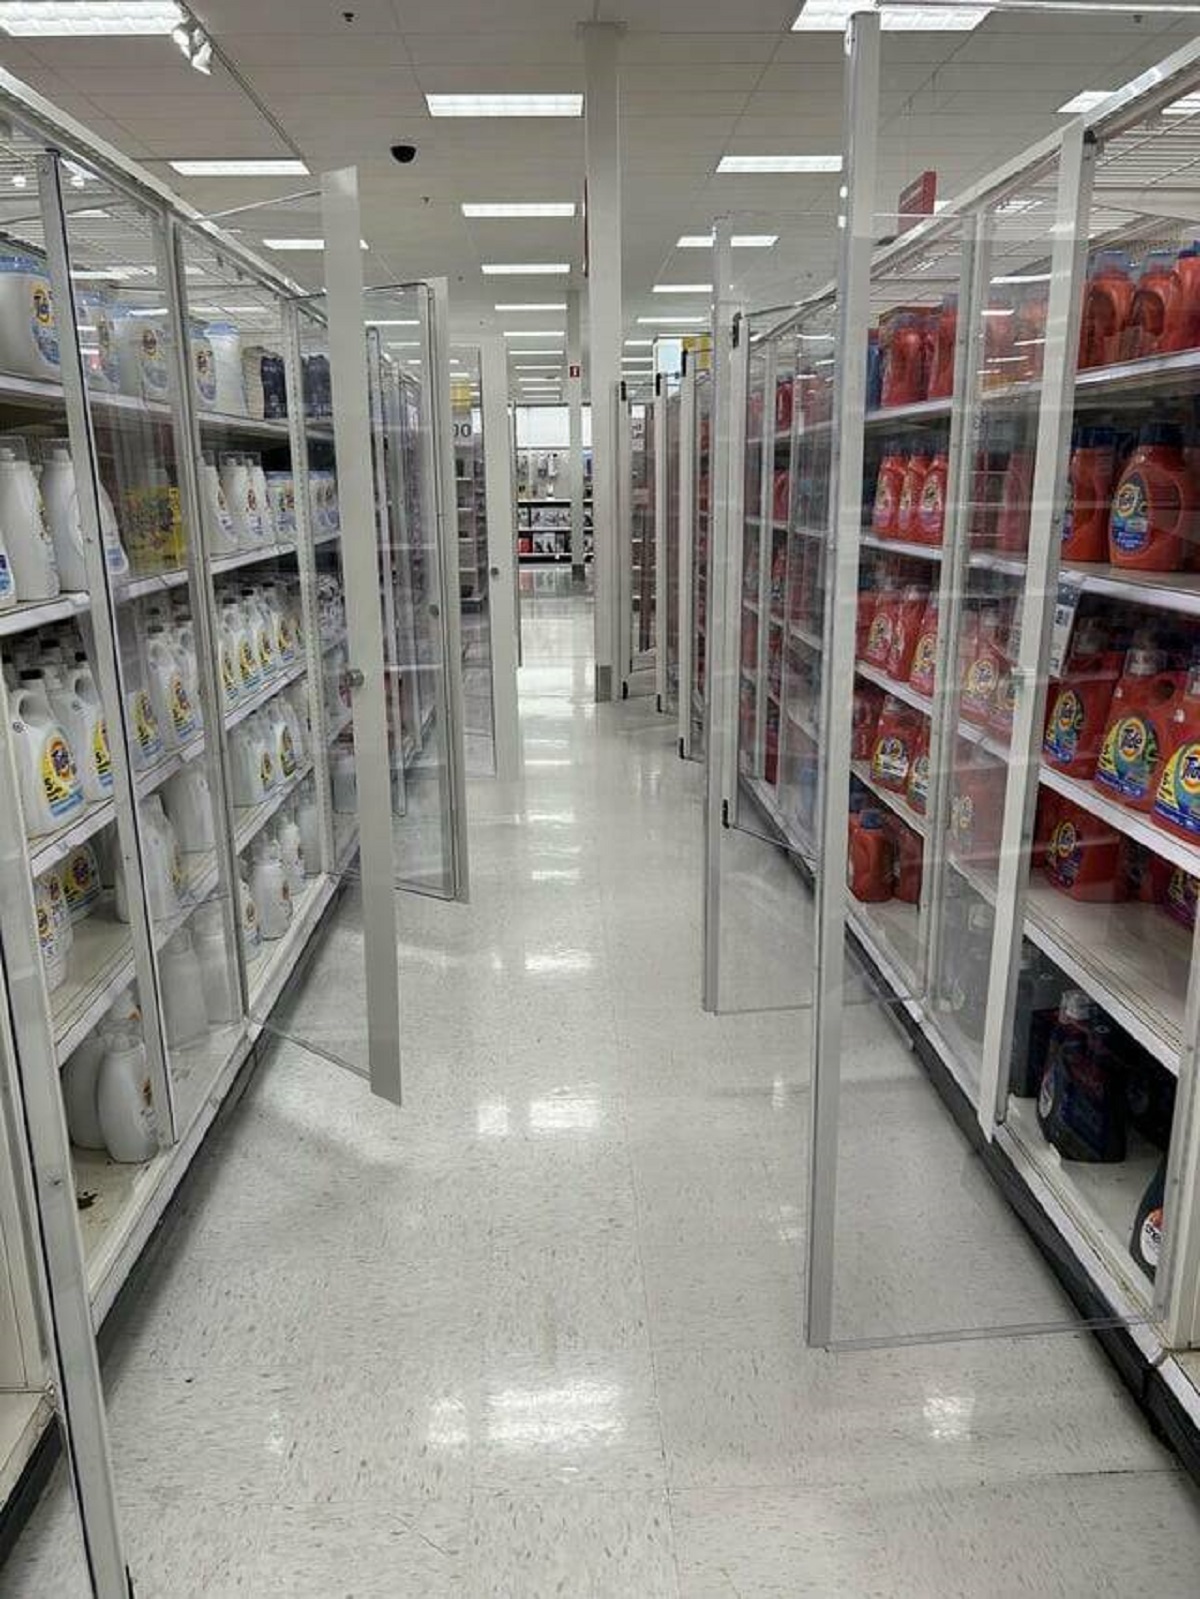 "All the locked doors at this Target are unlocked"